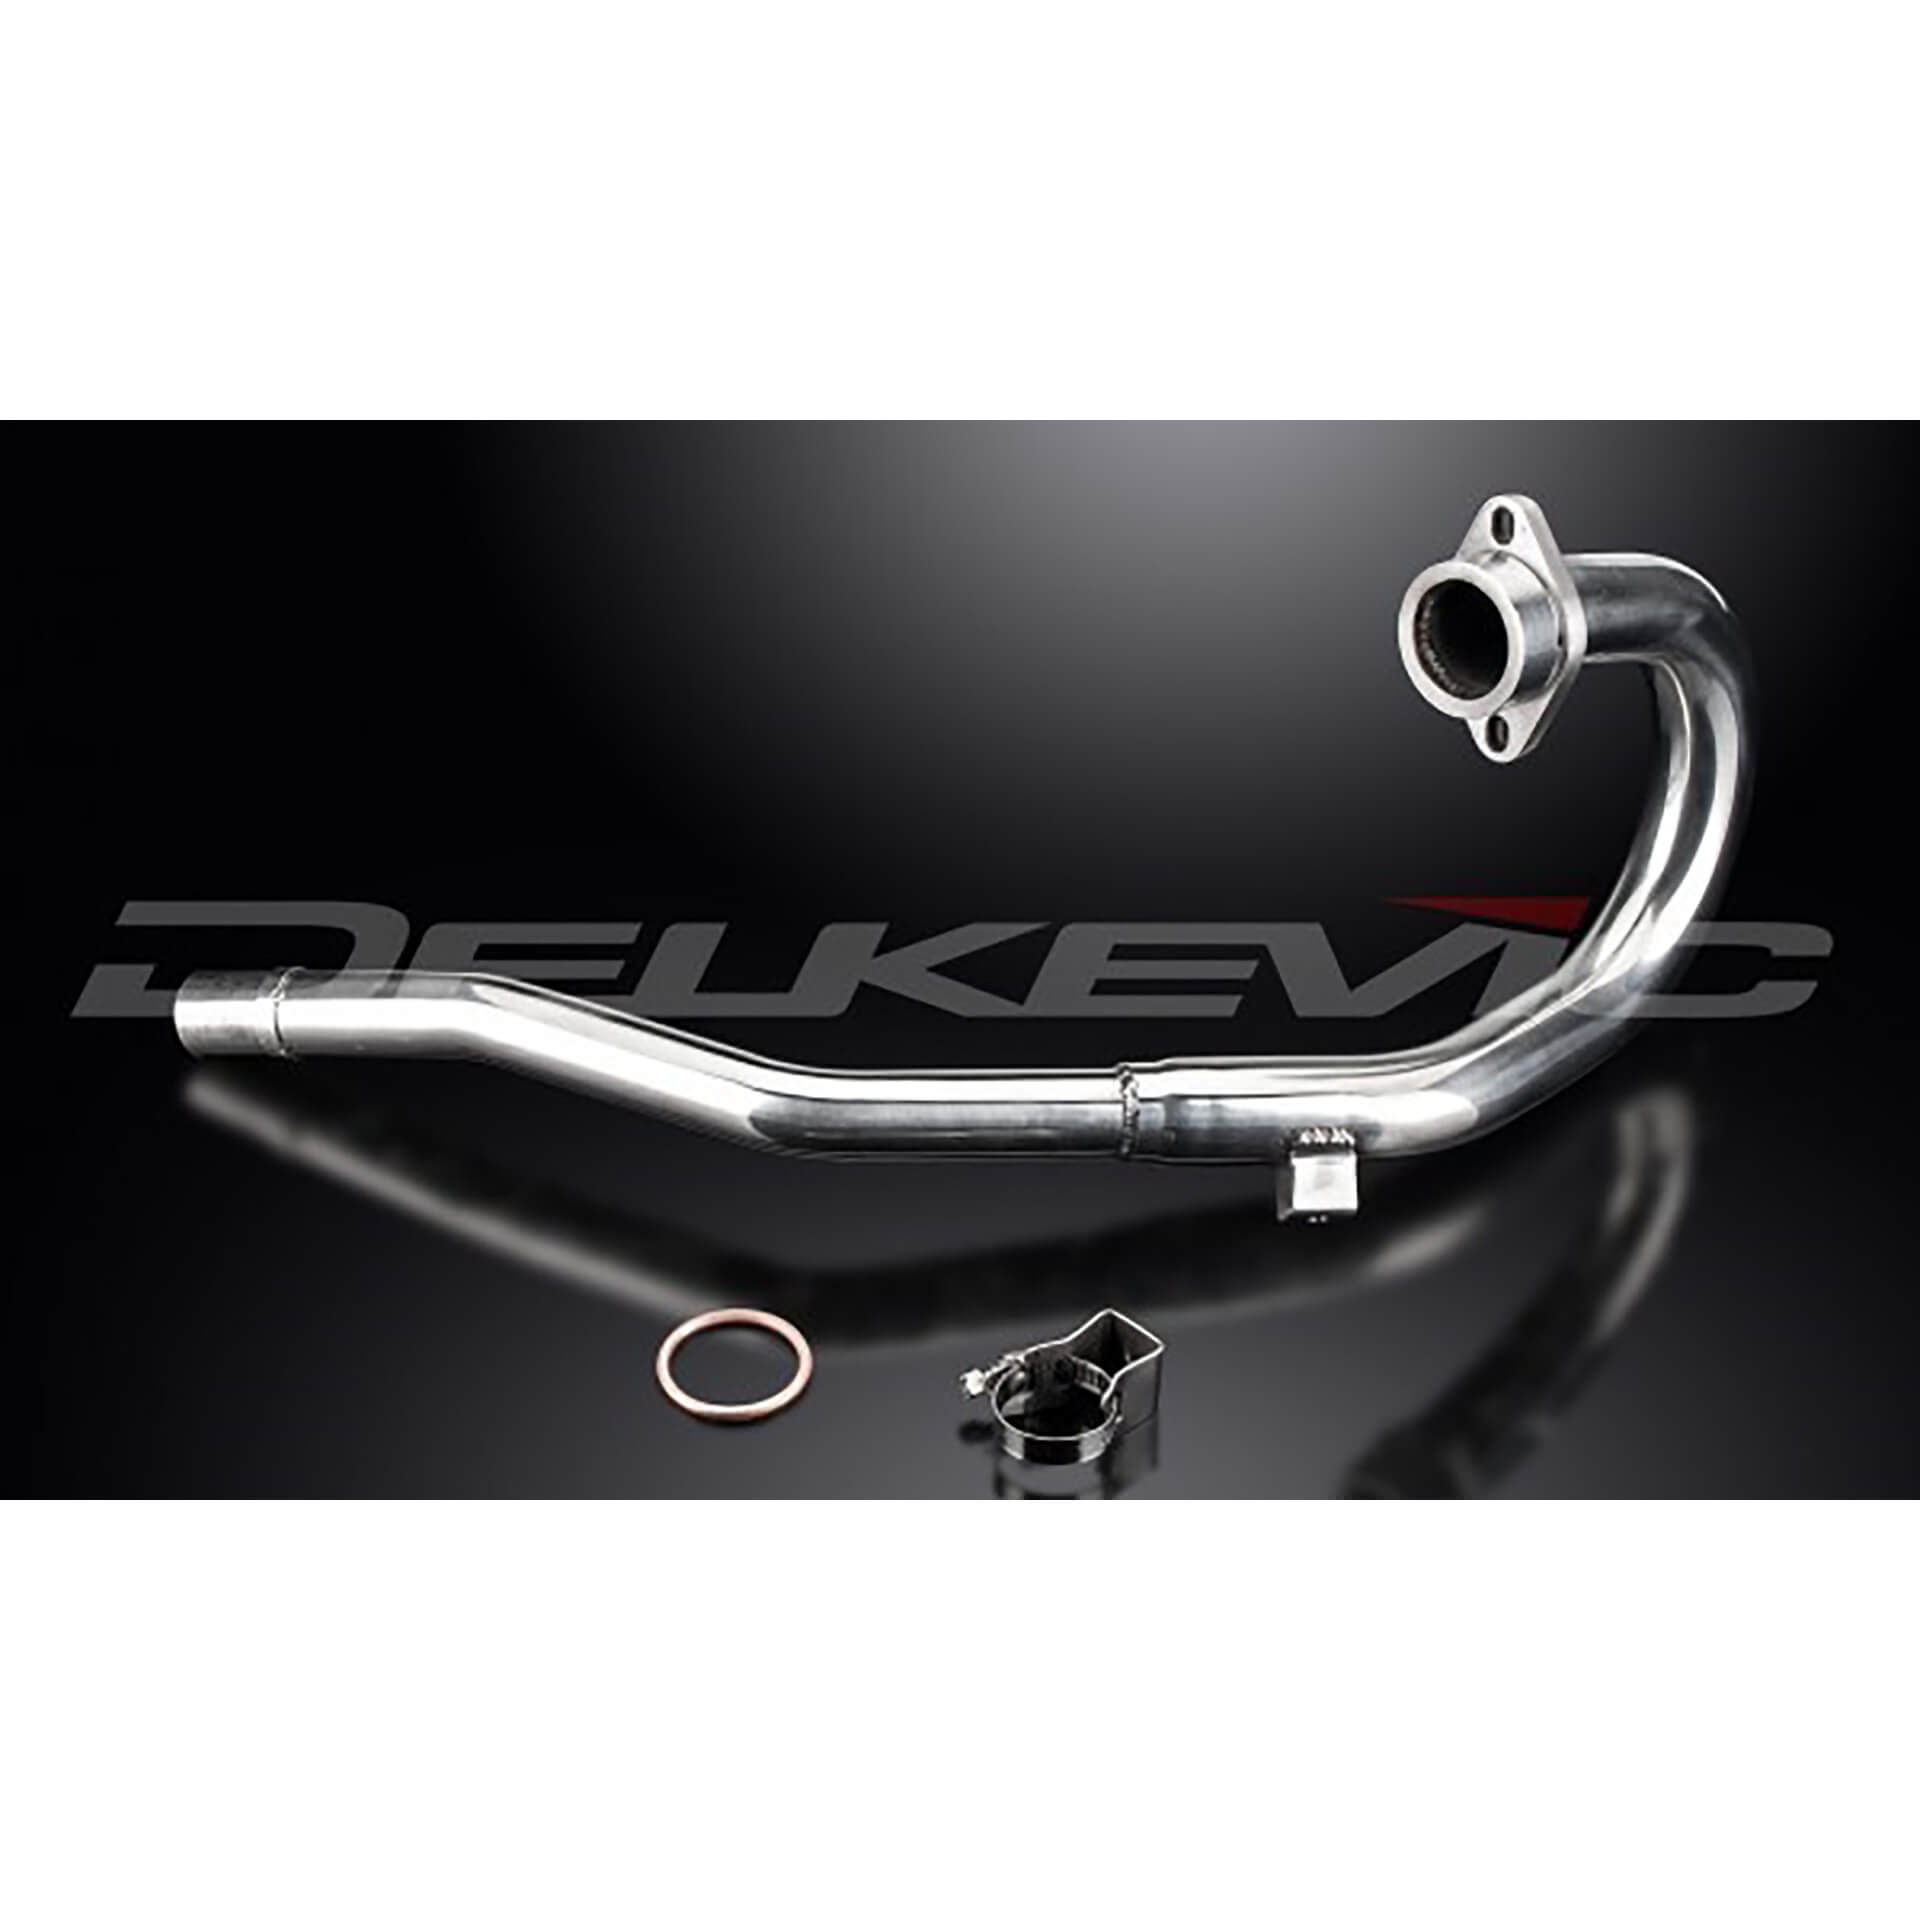 delkevic Manifold, stainless steel, HONDA CRF250L-M 12-16